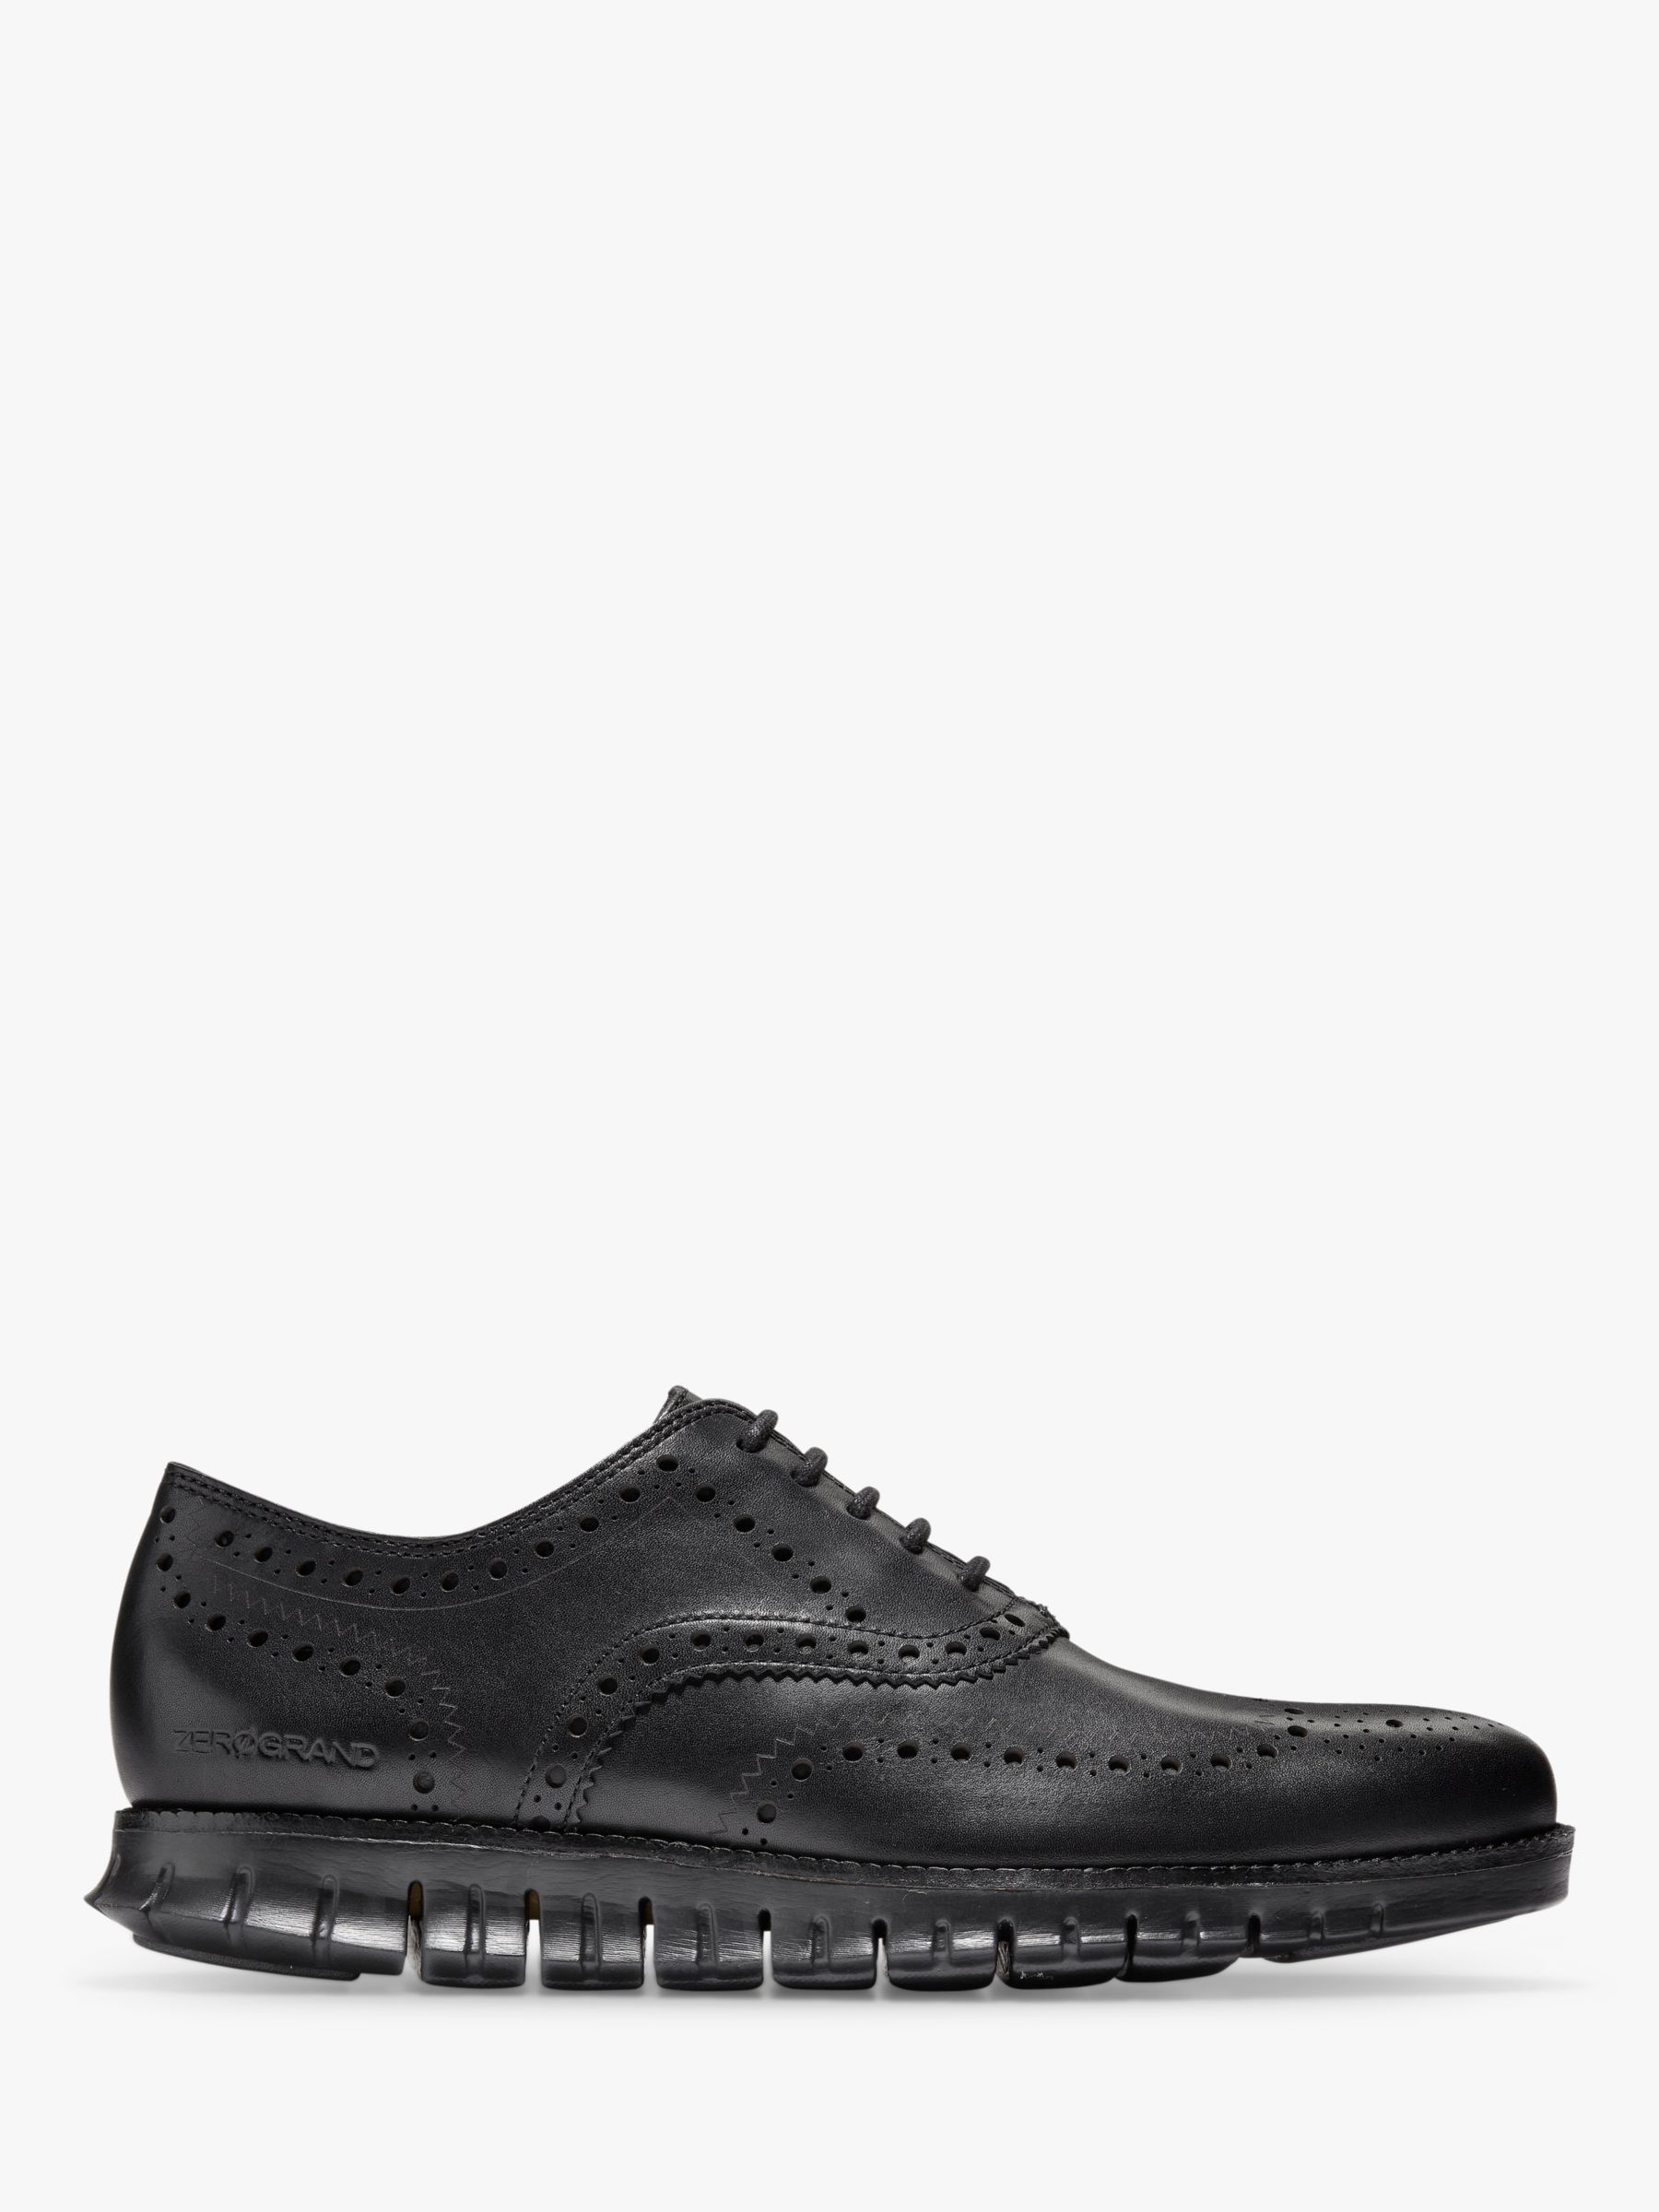 Cole Haan Zerogrand Wingtip Leather Oxford Shoes, Black Closed Holes at ...